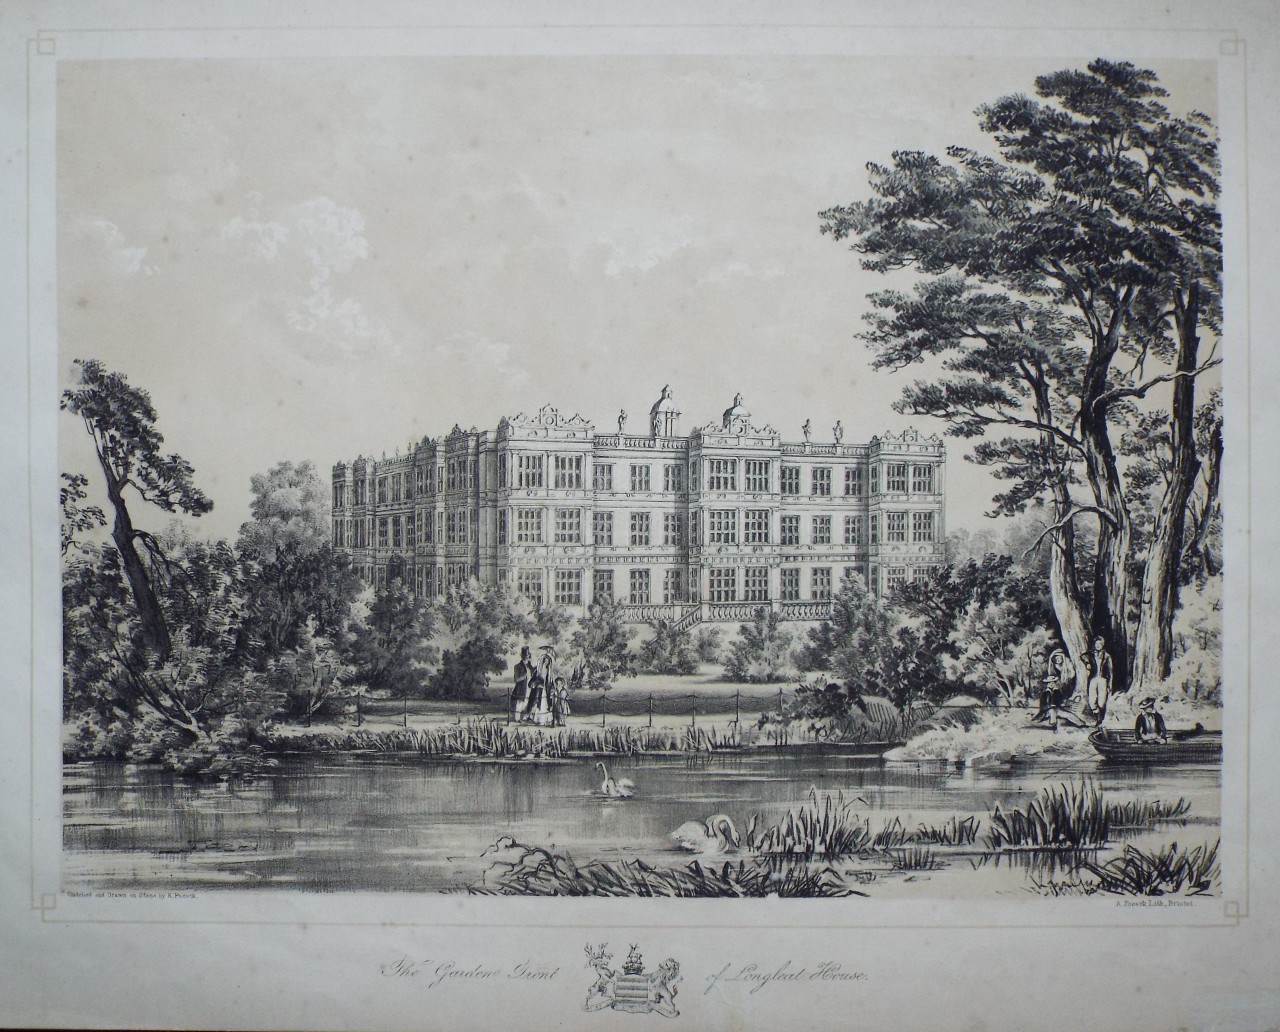 Lithograph - The Garden Front of Longleat House. - Pocock